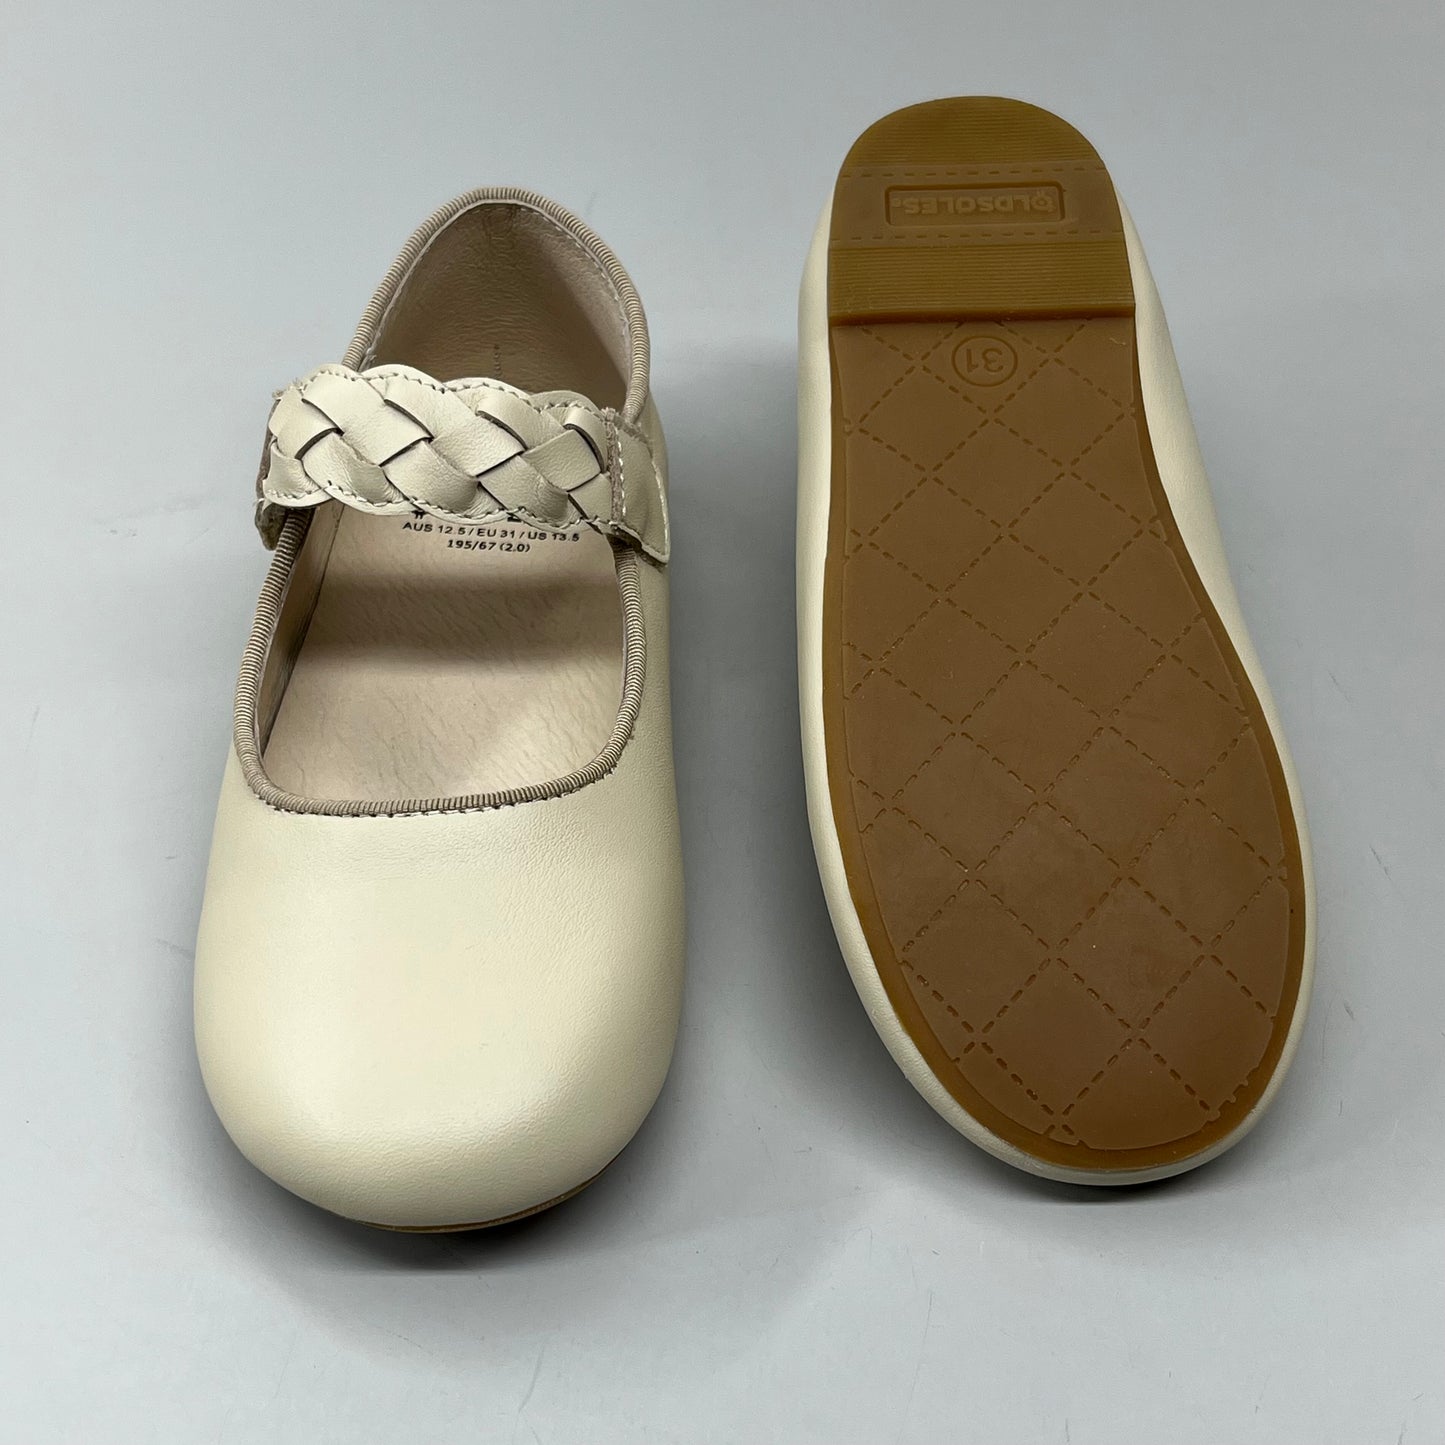 OLD SOLES Lady Plat Braided Strap Leather Shoe Kid’s Sz 29 US 12 Cream #817